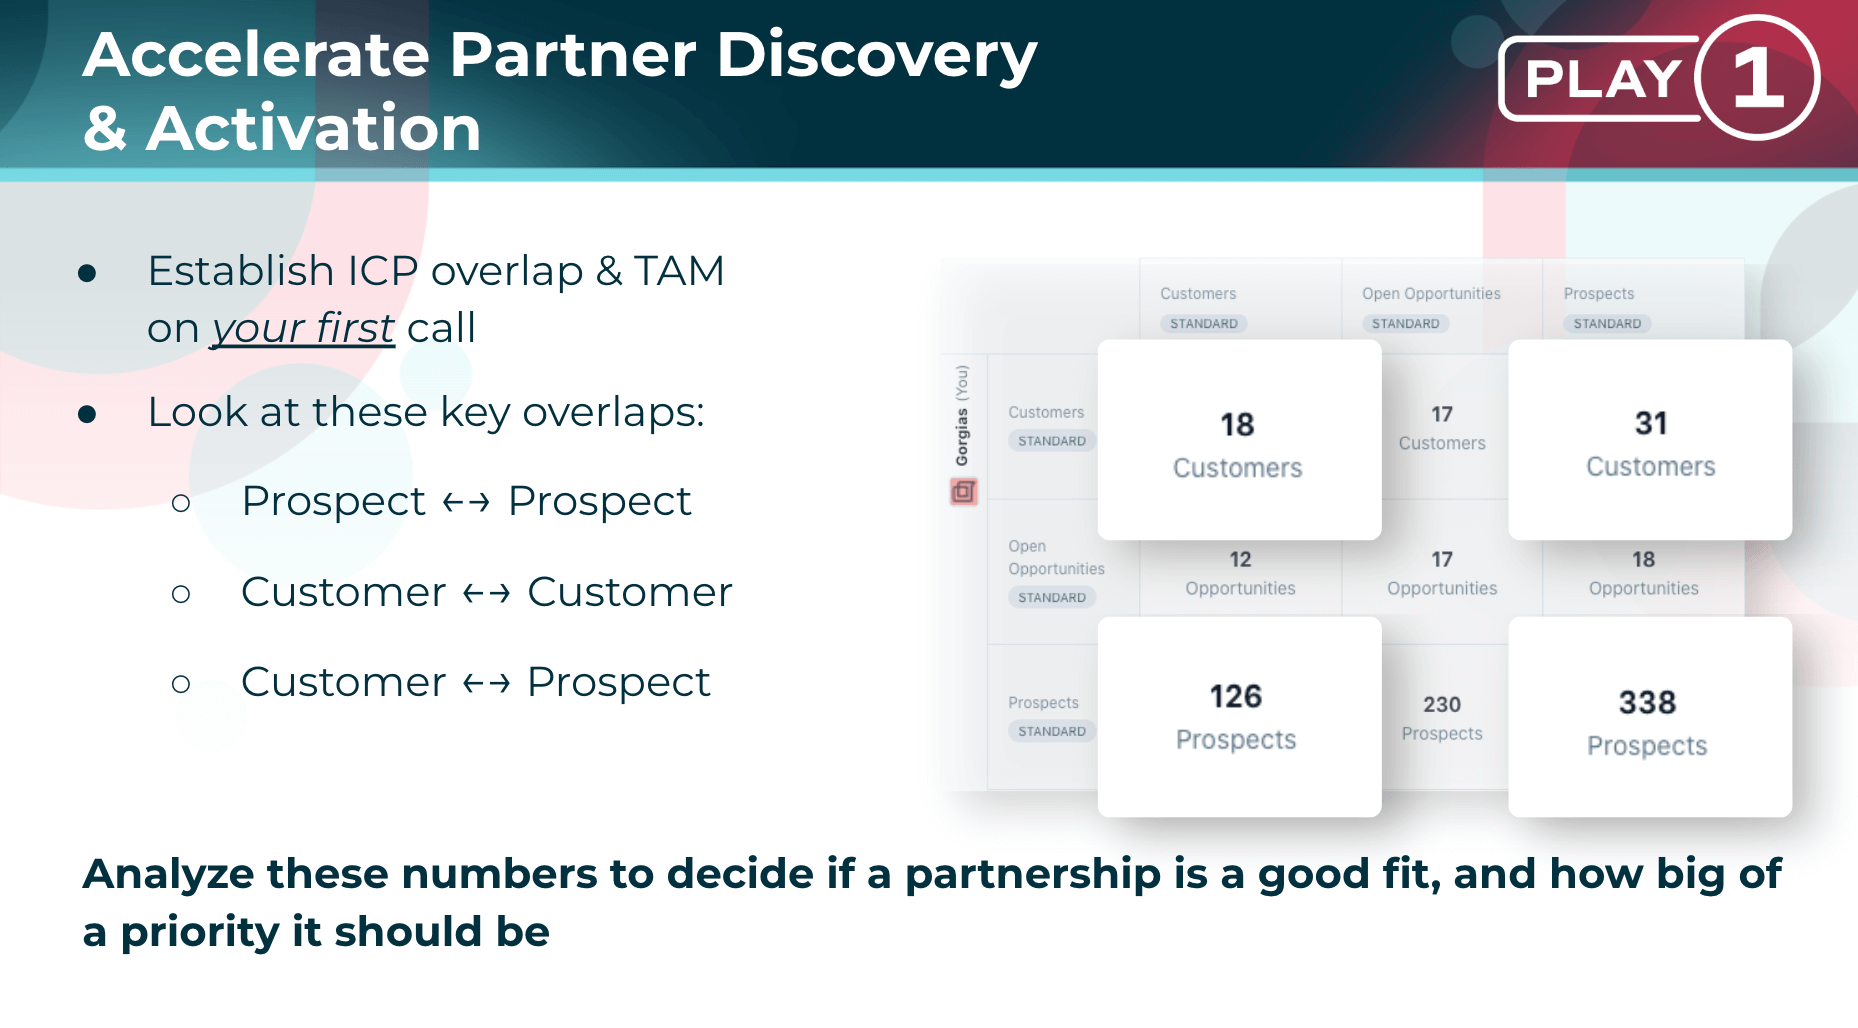 crossbeam-supernode-conference-partnerships-chris-lavoie-partner-discovery-and-activation-slide